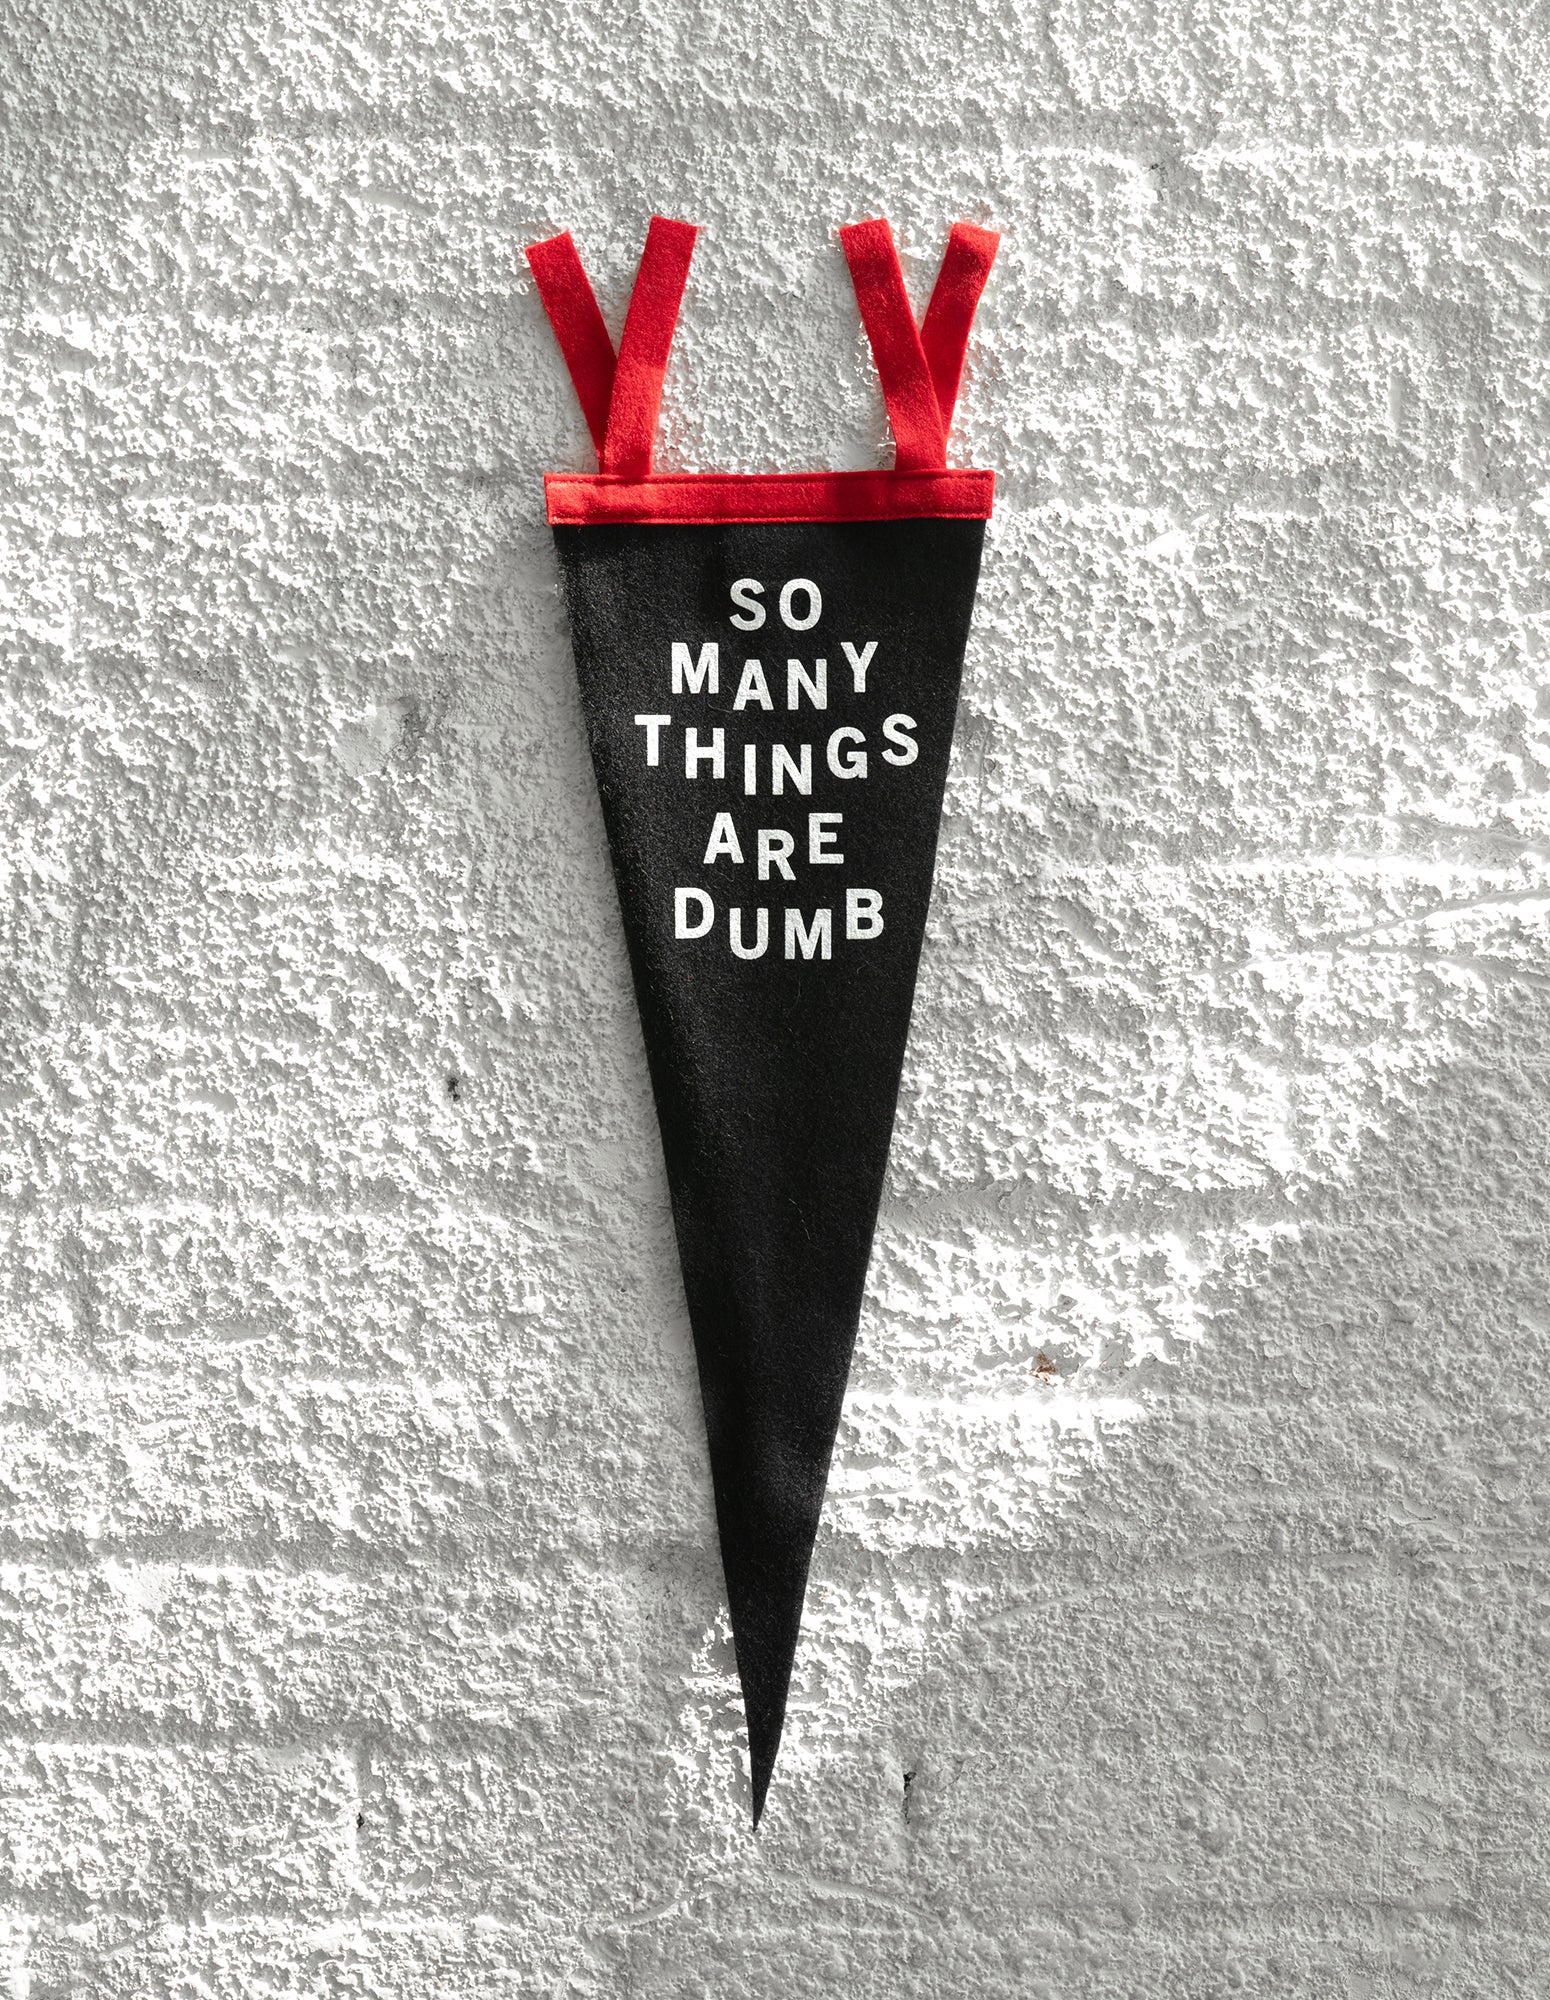 A black pennant with red ties hanging vertically on a concrete wall.  The phrase "So Many Things are Dumb" is printed on one side in white.  